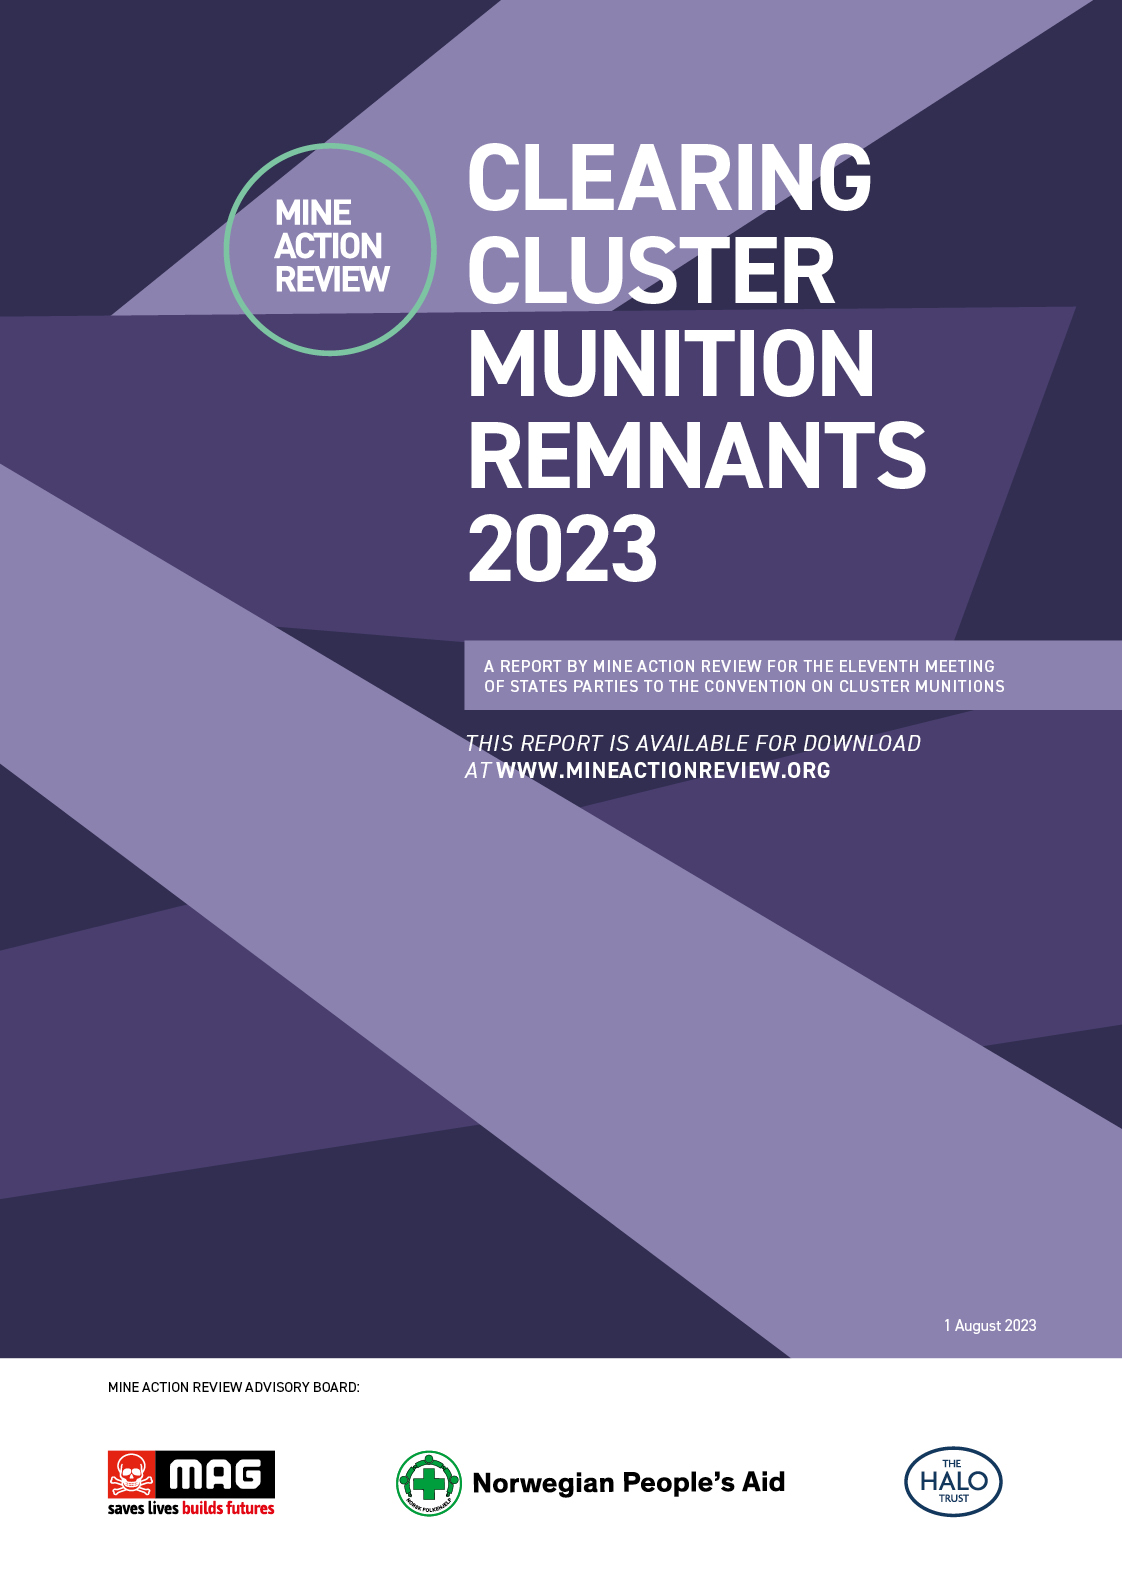 Clearing Cluster Munition Remnants 2023